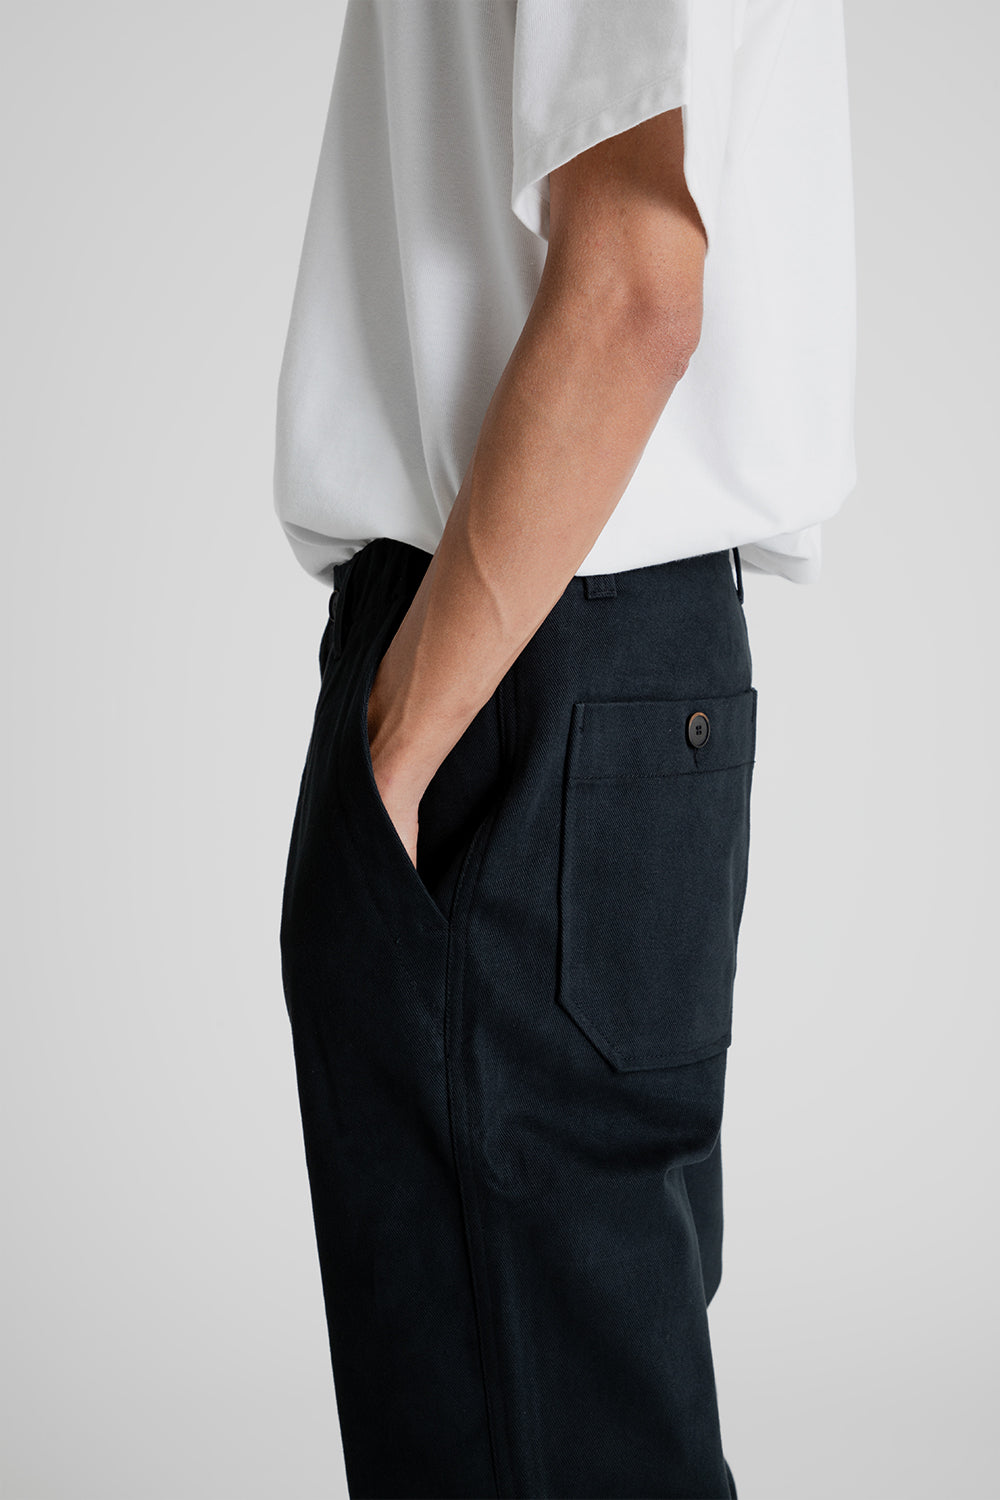 Parages Dock Twill Pants in Black